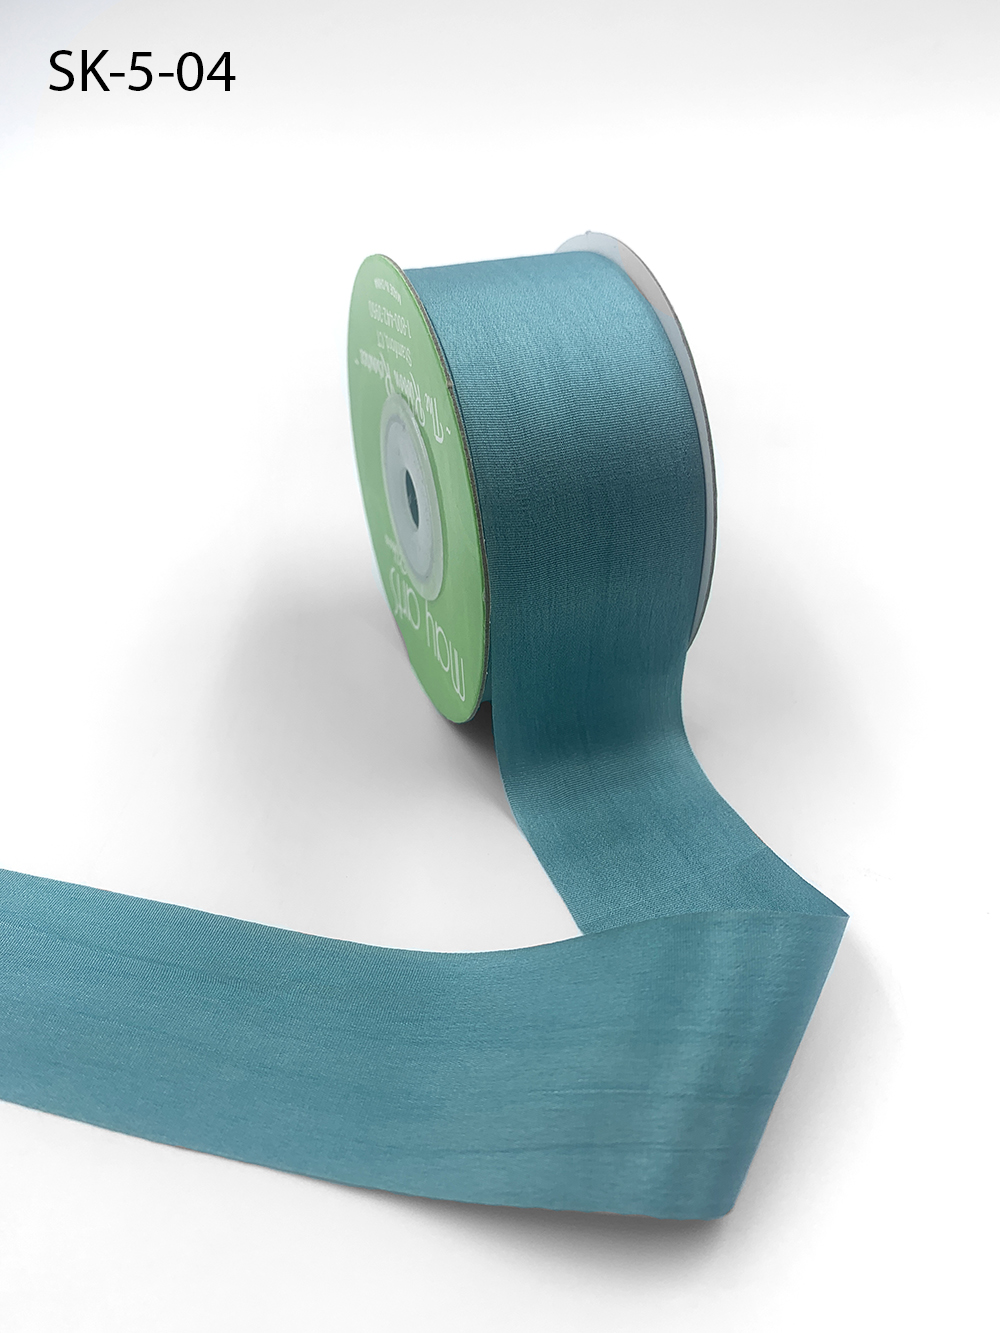 May Arts 1cm Wide Ribbon, Light Blue Cheque